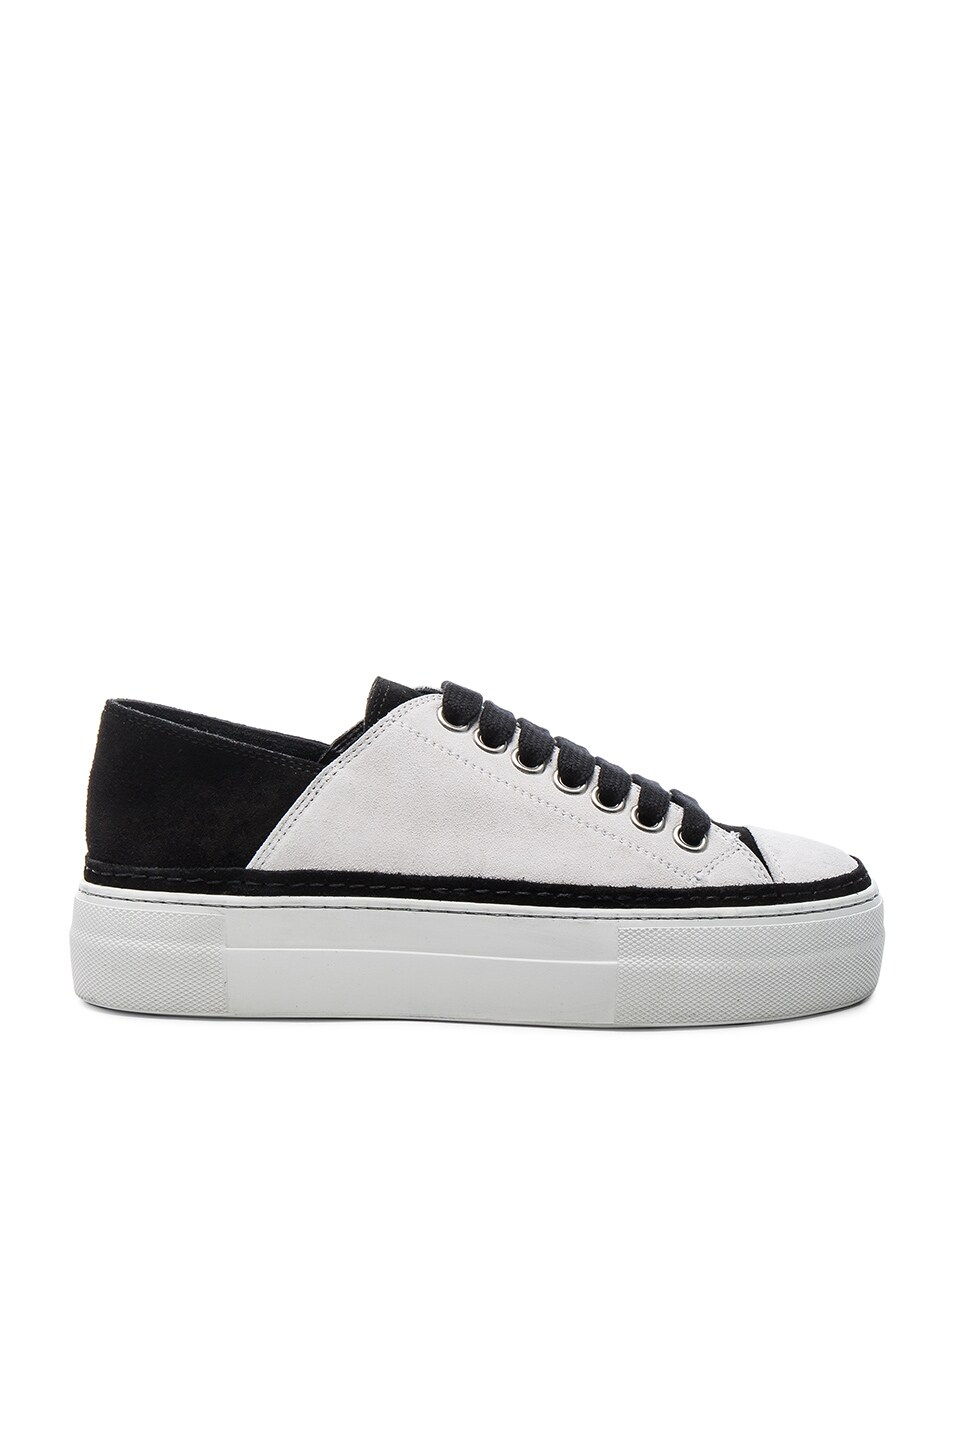 Image 1 of Ann Demeulemeester Suede Low Top Sneakers in Black & White